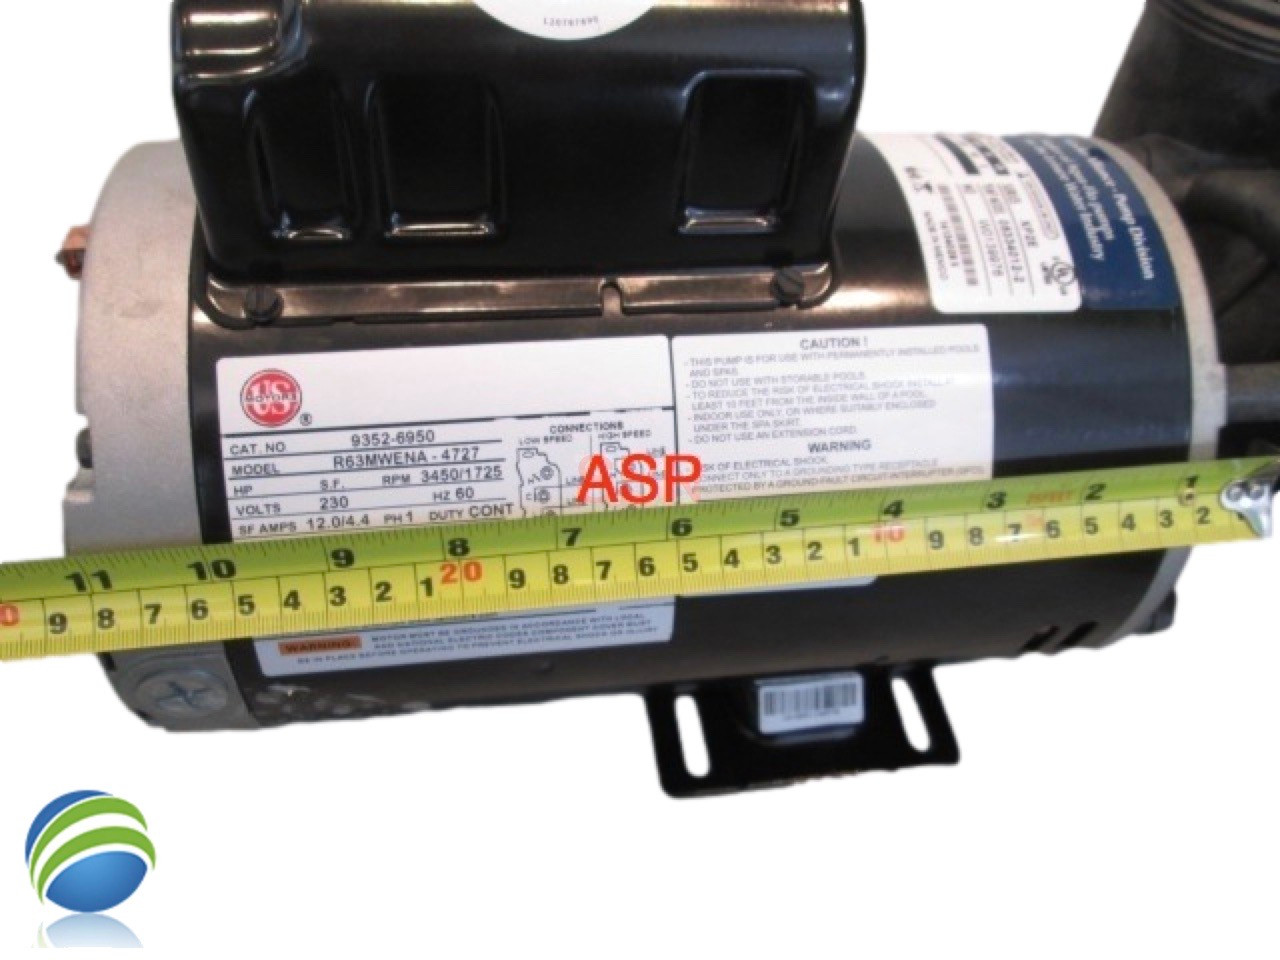 Complete Pump for Sundance, TheraMax II, 6500-901 or 6500-902,  2.5HP, 230v, 56fr, 2"X 2" 1 Speed 11-12A